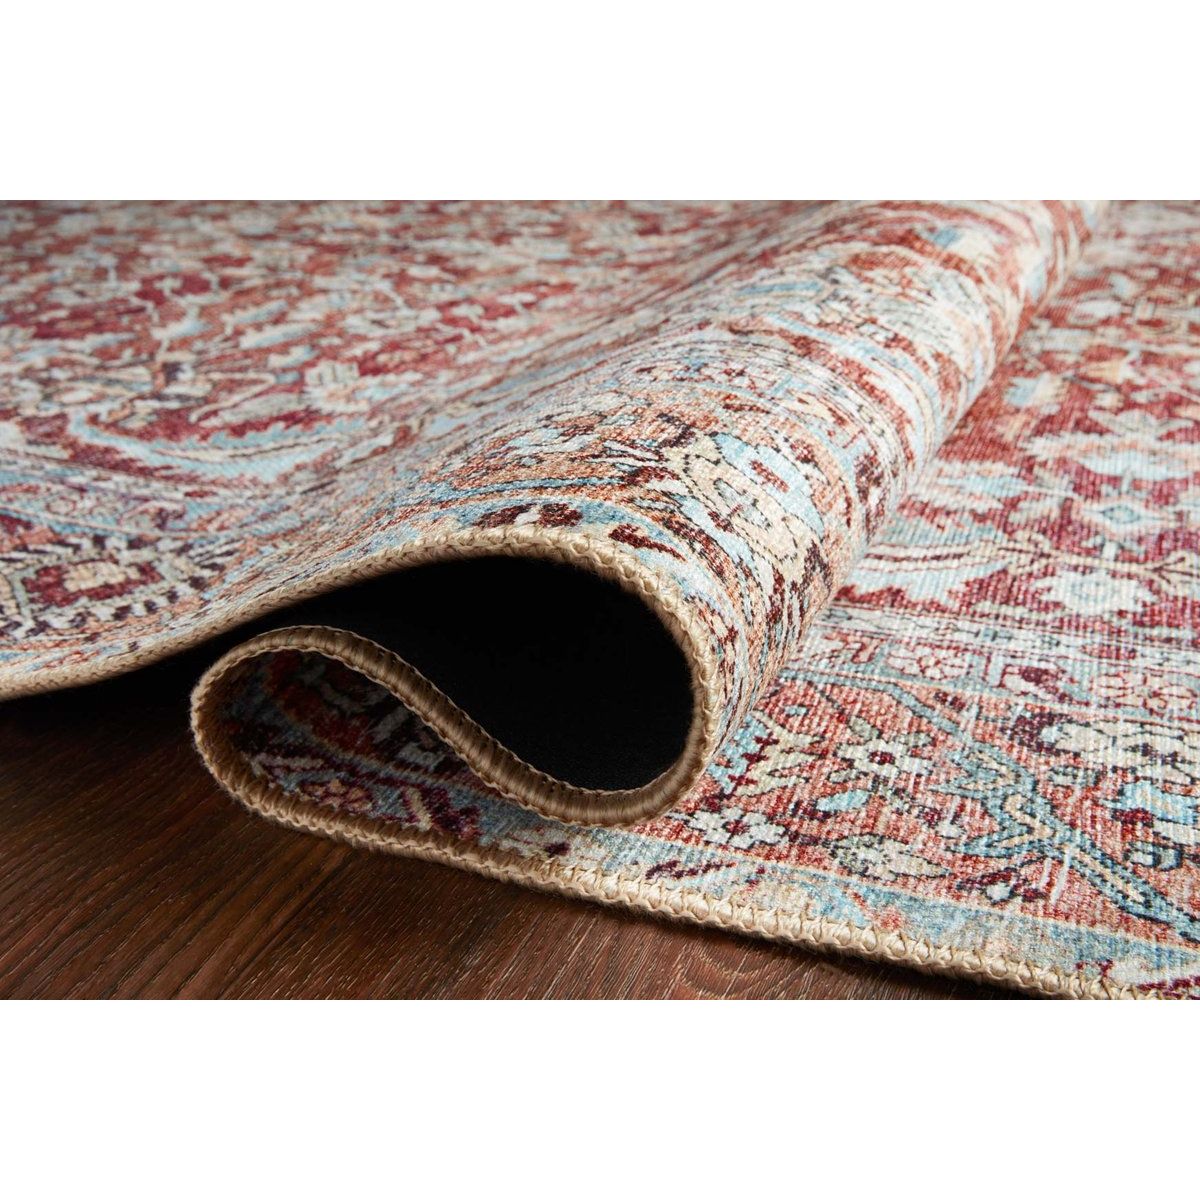 Old soul, new spirit. Power-loomed of 100% polyester, the Wynter Tomato / Teal area rug showcases a one-of-a-kind vintage or antique area rug look at an affordable price. This rug brings in tones of red, blue, orange, and hints of ivory, and ideal for high traffic areas due to the rug's durability. The rug is perfect for living rooms, dining rooms, kitchens, hallways, and entryways.  Power Loomed 100% Polyester WYN-05 Tomato/Teal Colors: Red, Orange, Blue, Ivory